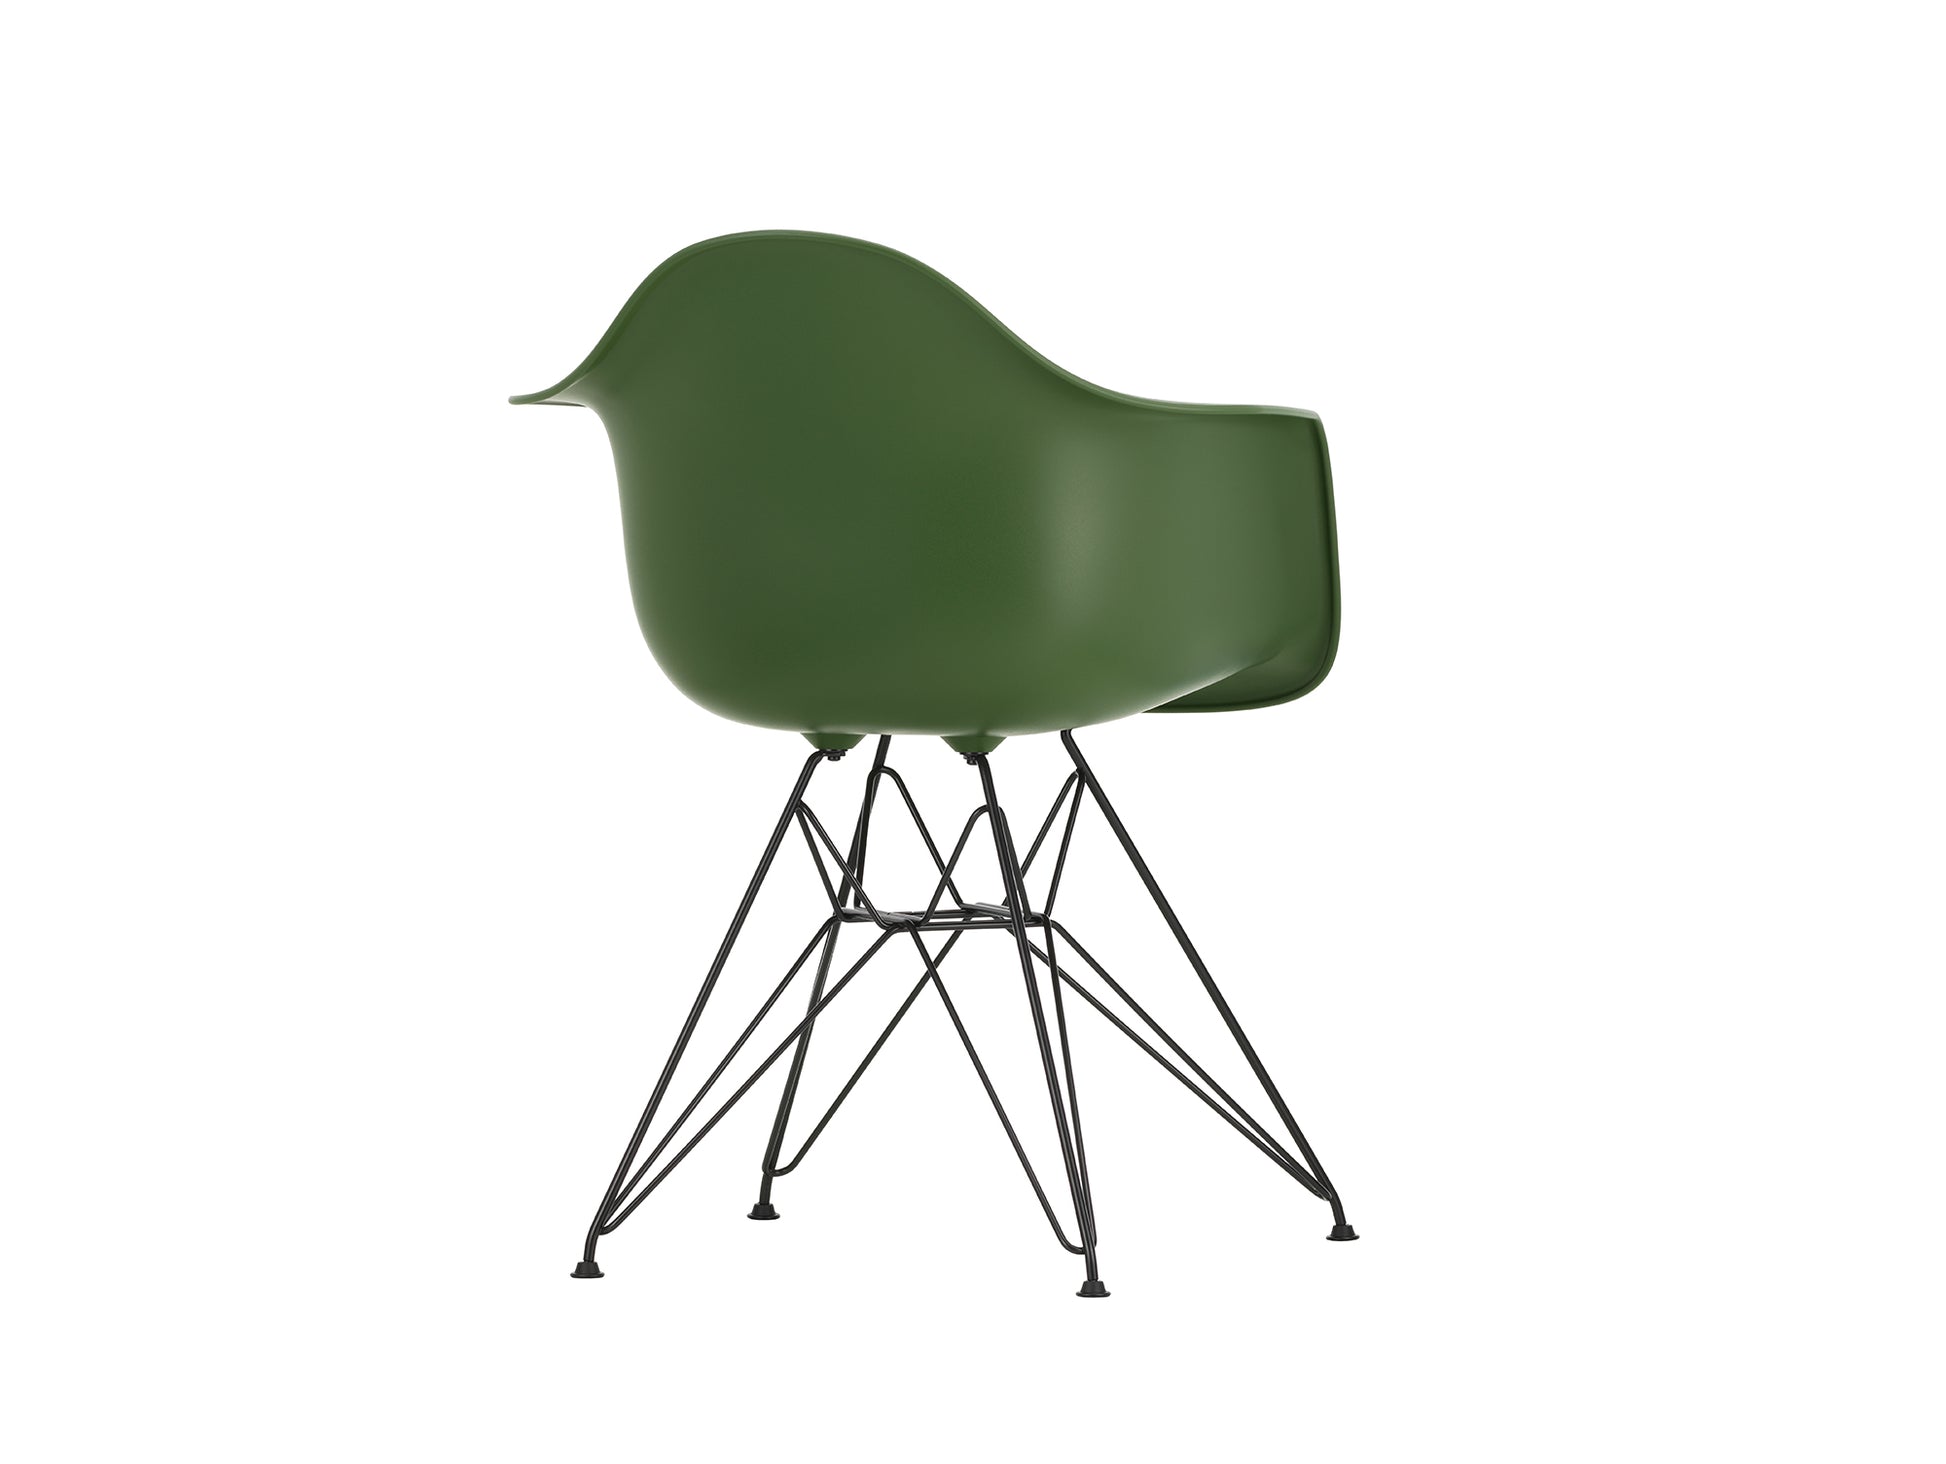 Eames DAR Plastic Armchair RE by Vitra - 48 Forest Shell / Basic Dark Base